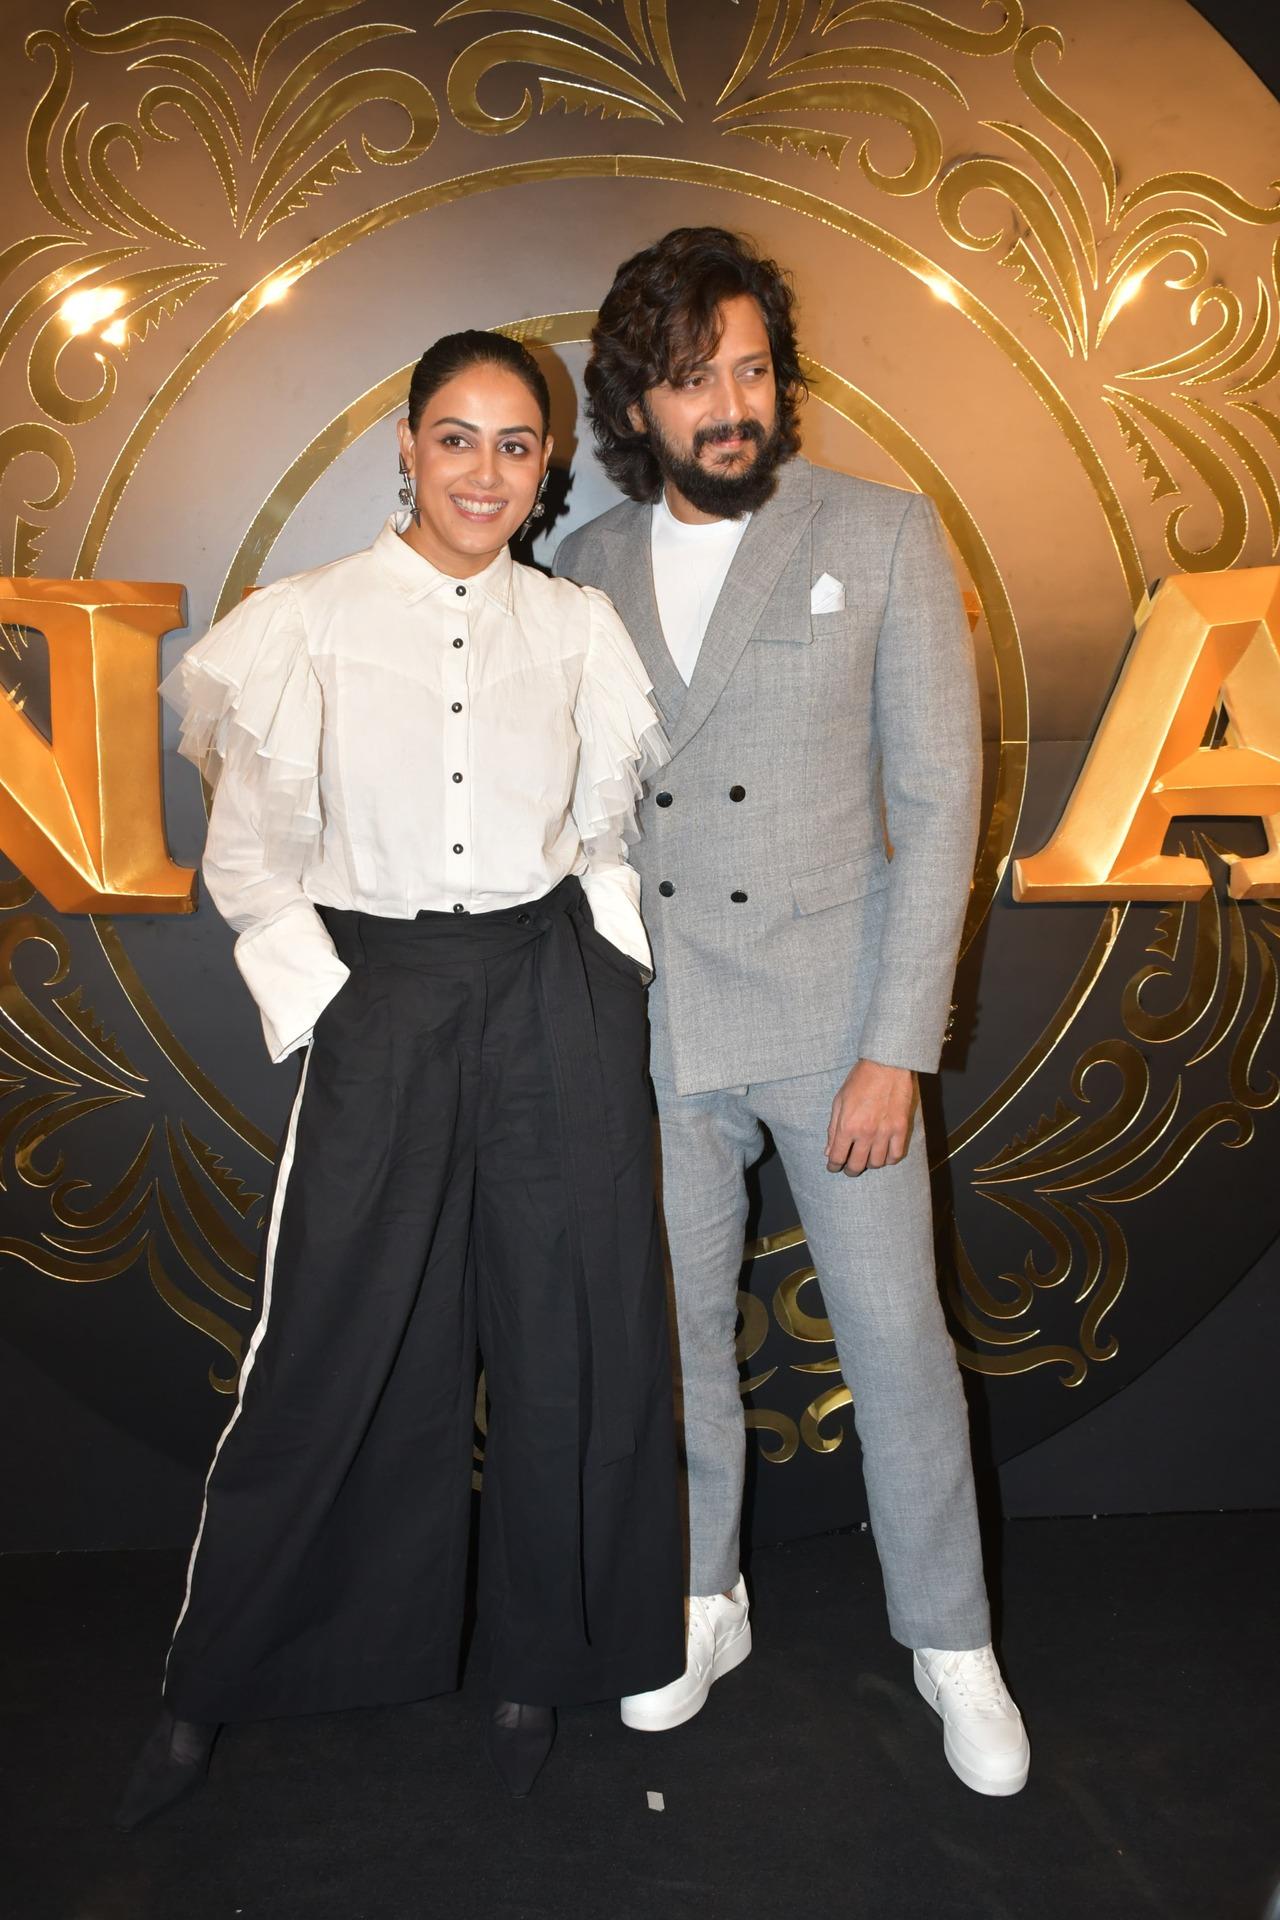 Riteish and Genelia Deshmukh suited up for the night